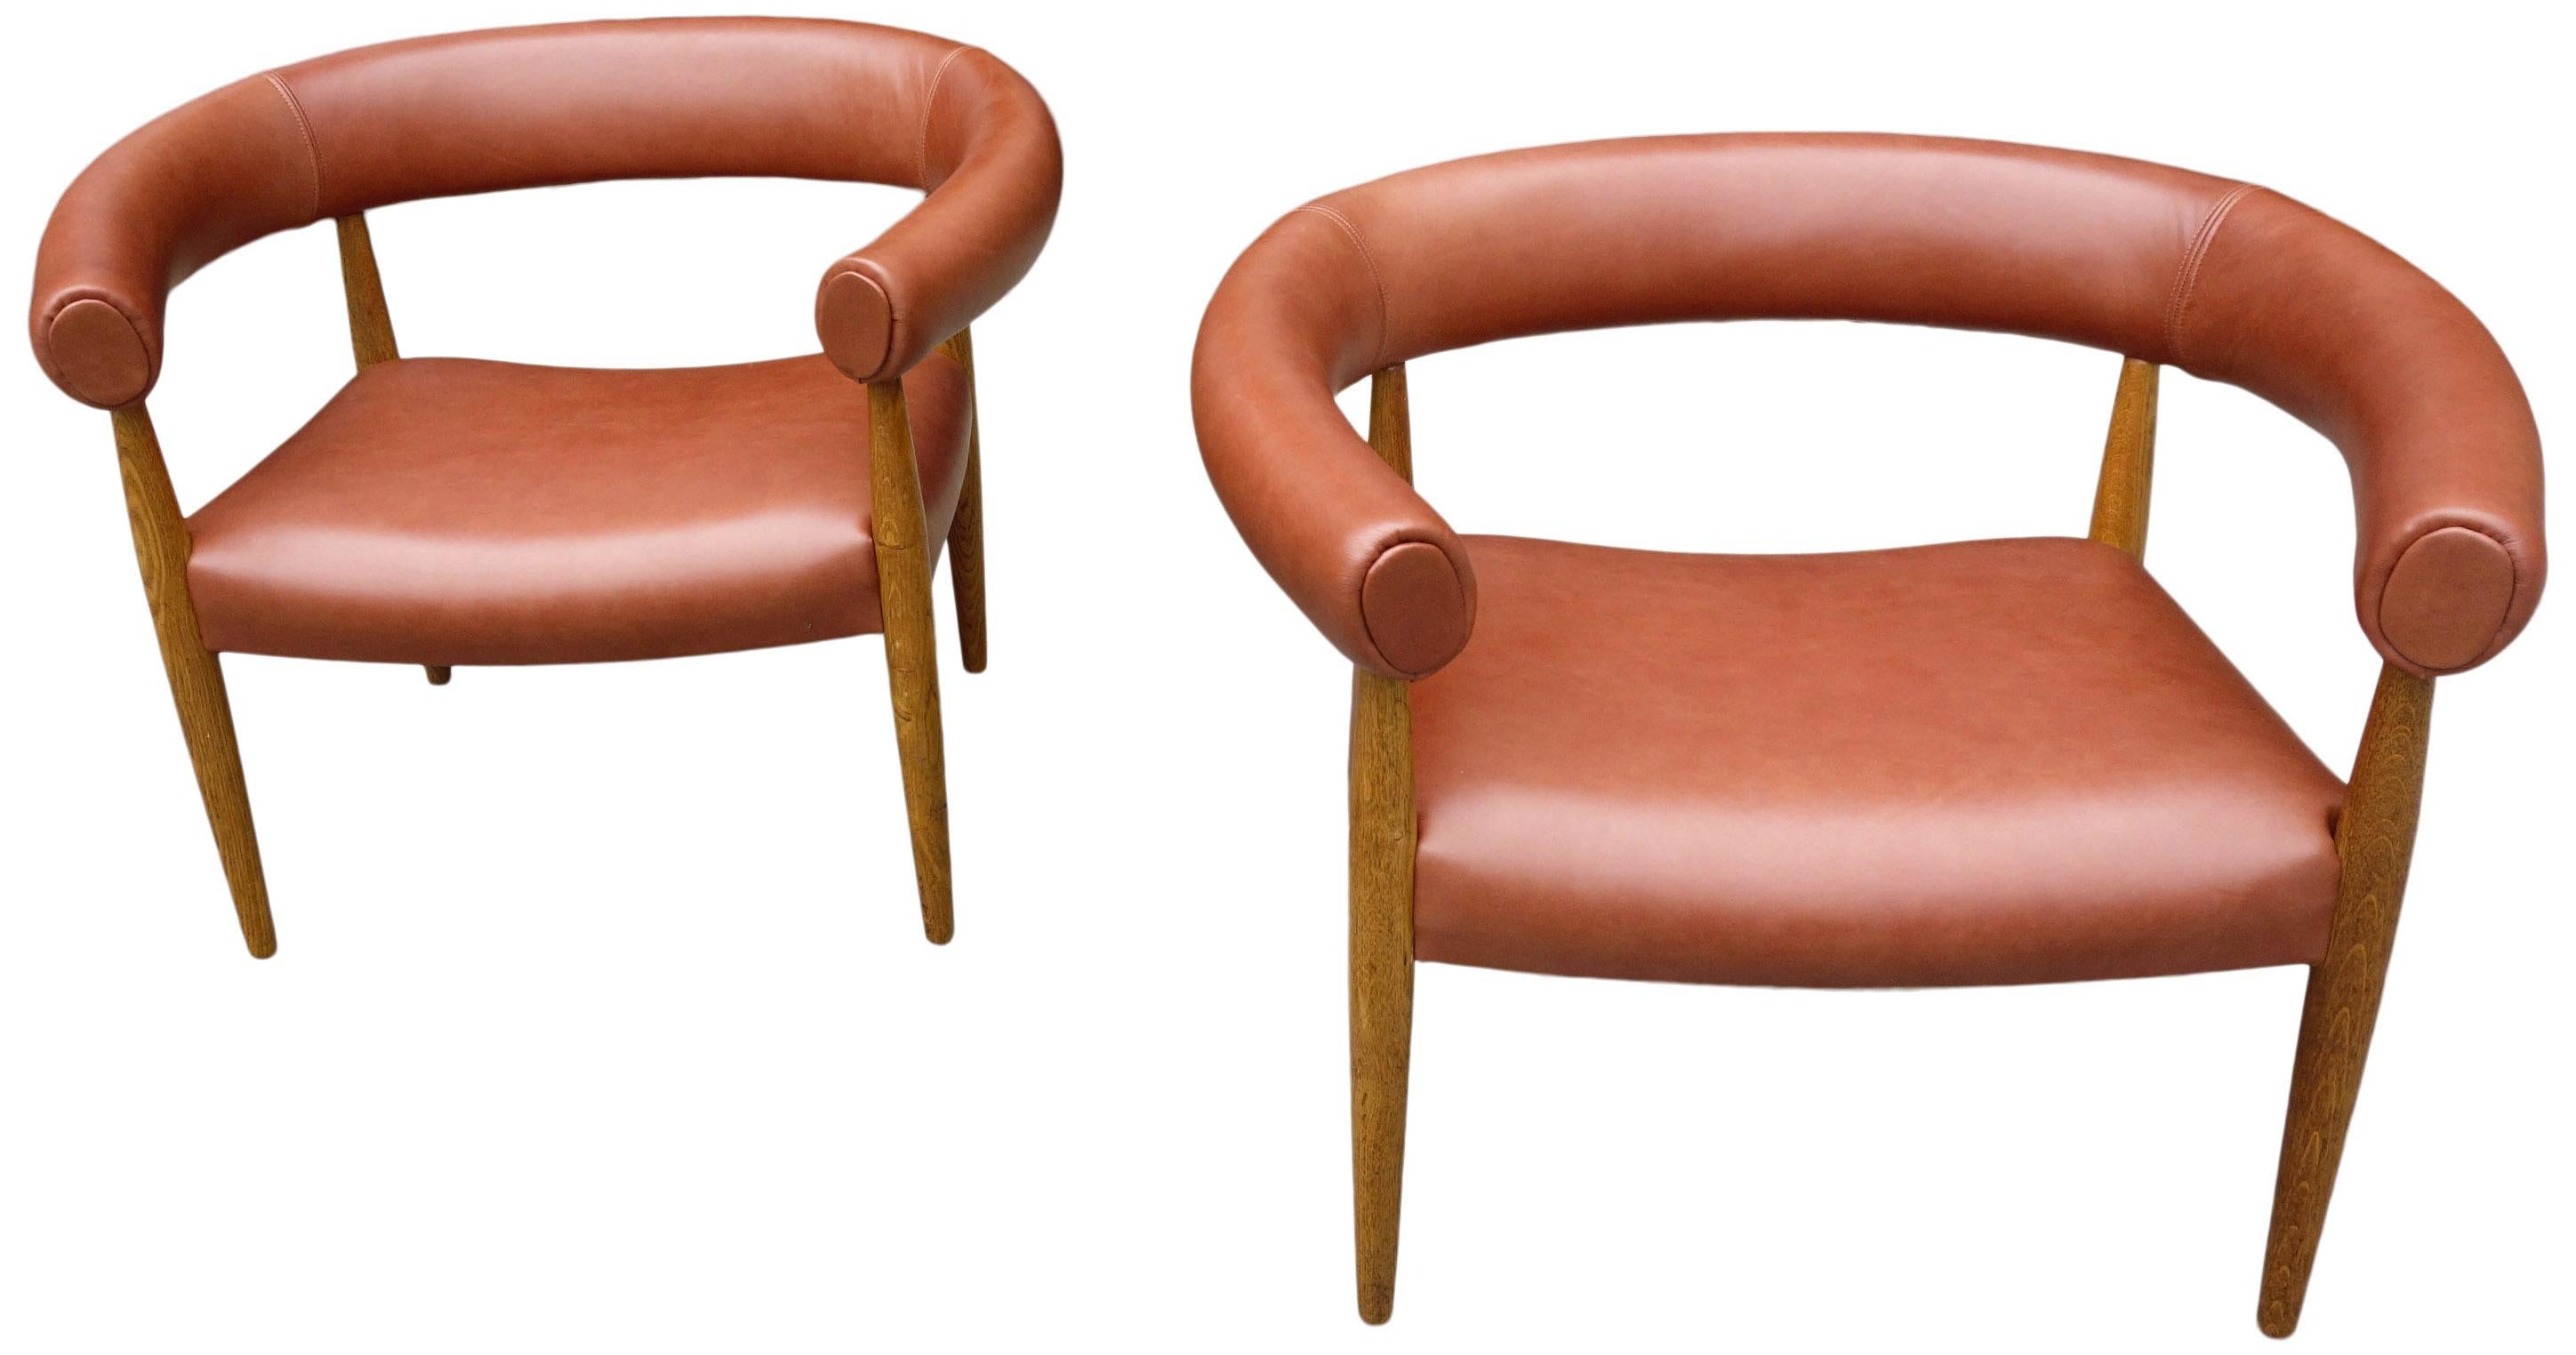 For your consideration are these authentic and original Mid-century Nanna and Jorgen Ditzel Ring Chairs in leather and English Oak. 
Newly recovered in soft saddle brown leather while keeping the original patina on the frame. Incredibly comfortable